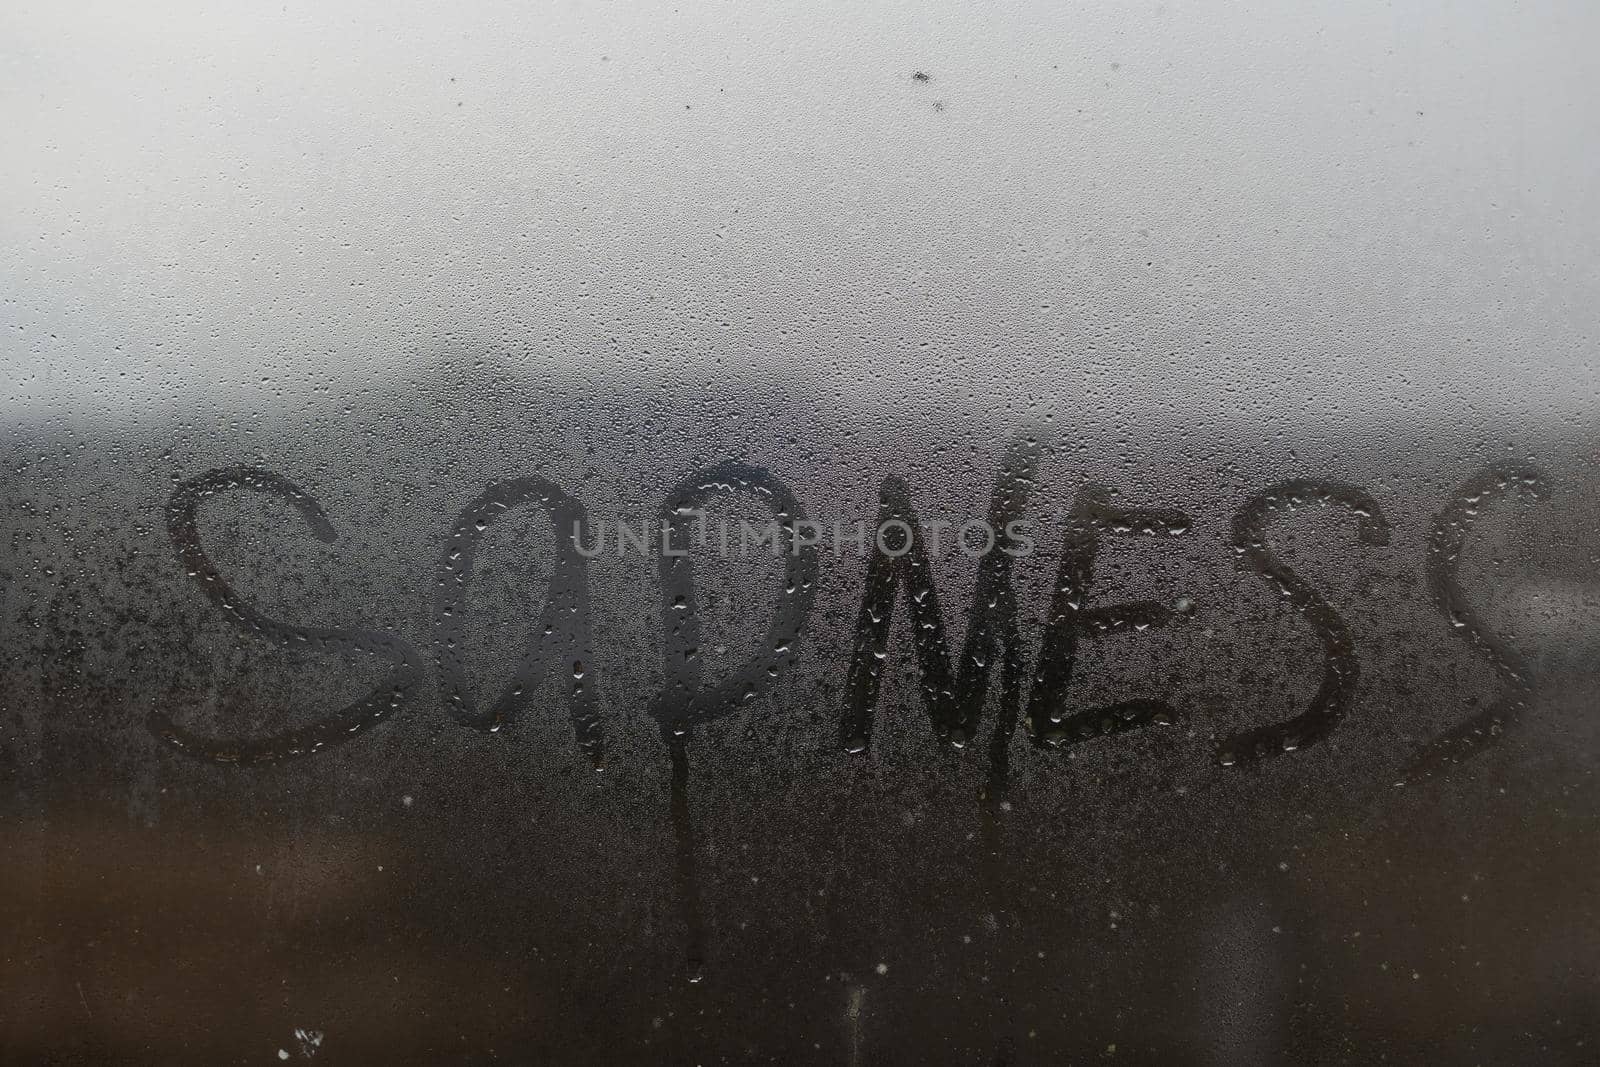 The inscription sadness on the wet window